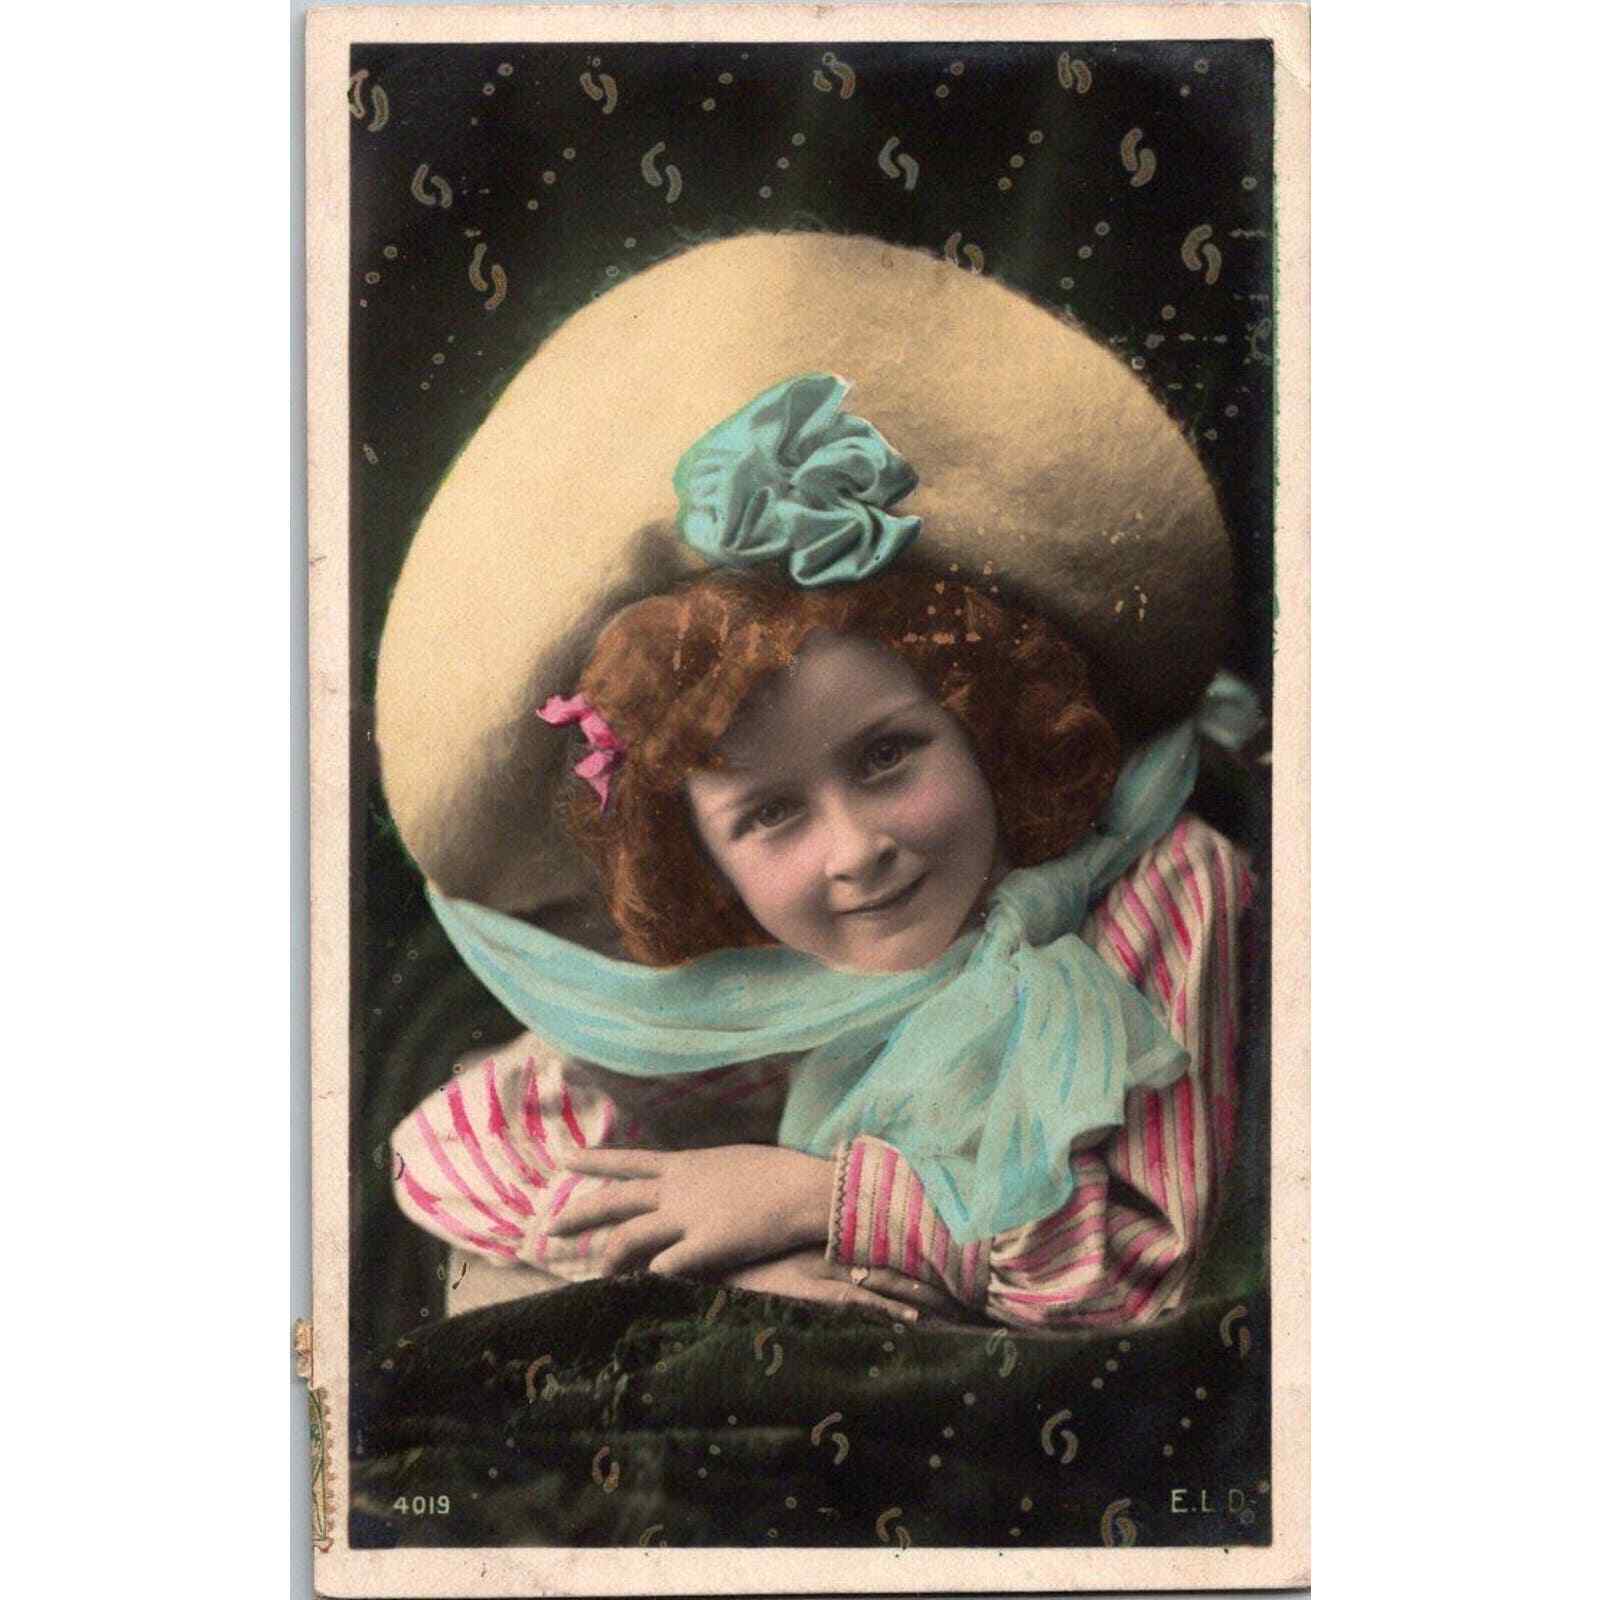 Vintage Edwardian Postcard Adorable Girl with Huge Hat and Scarf RPPC 1900s